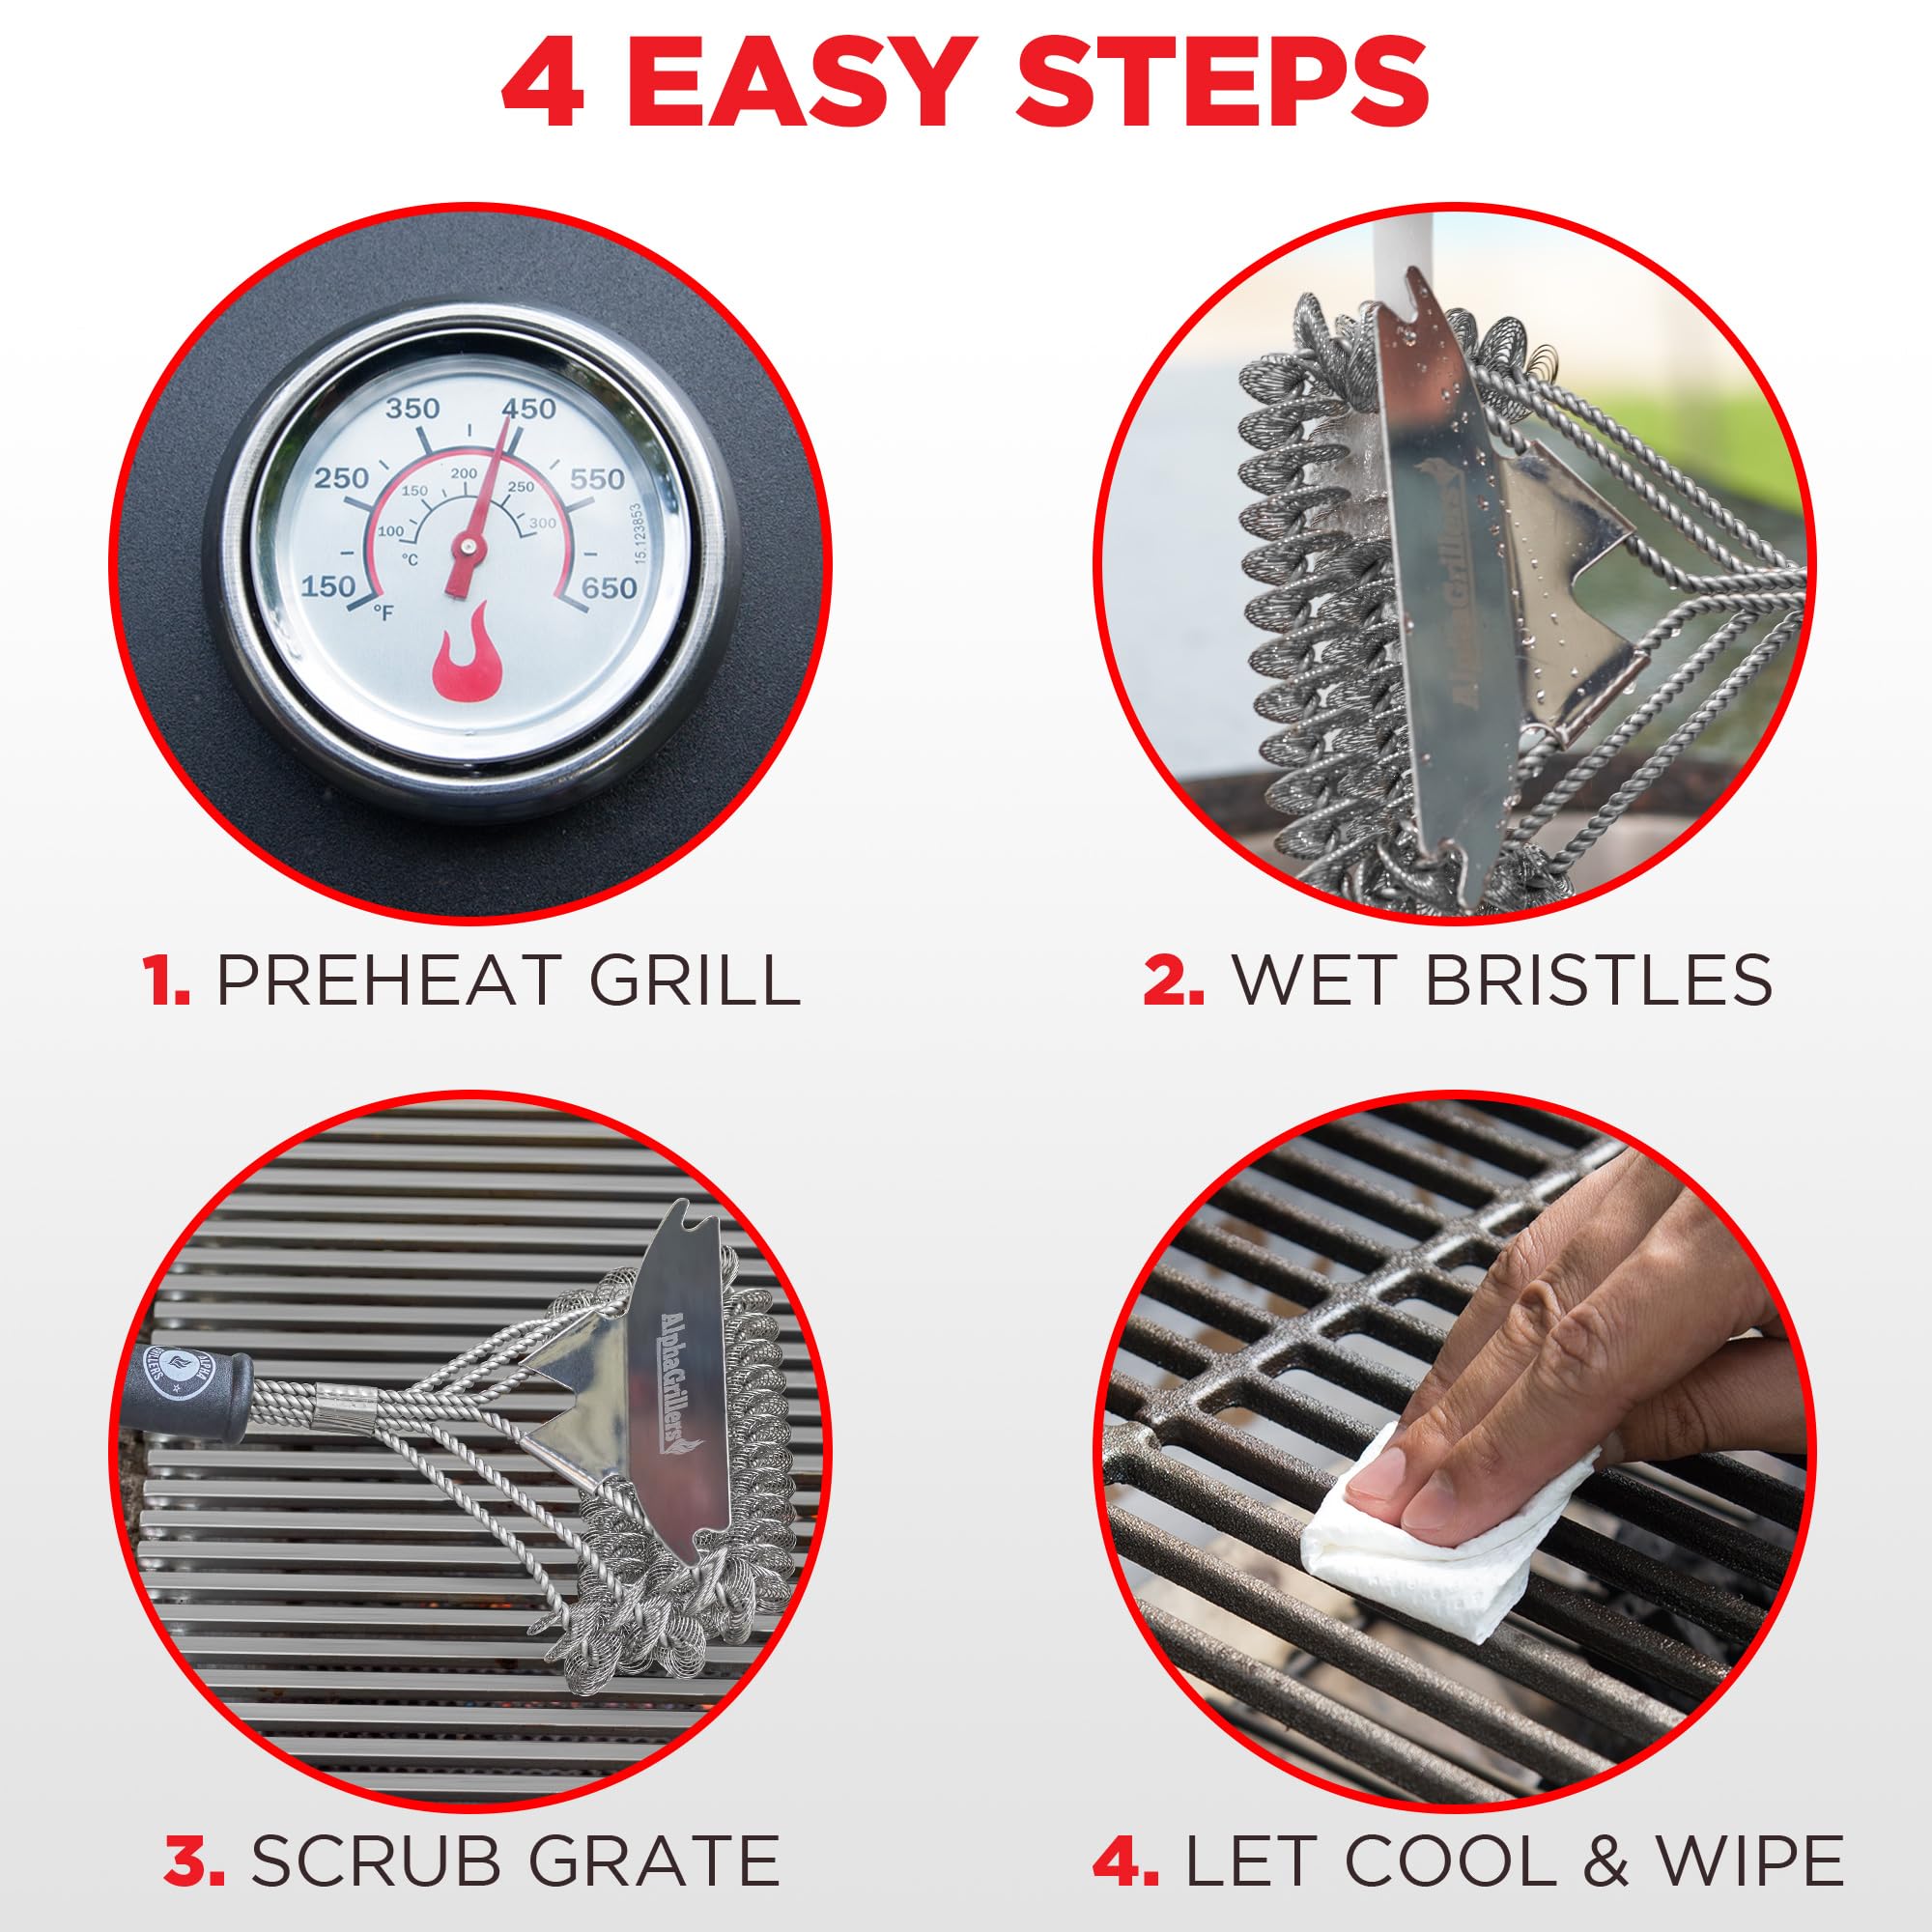 Grill Brush for Outdoor Grill Bristle Free - Heavy Duty 18" Grill Cleaner Brush Bristle Free & Grill Scraper - Stainless Steel Grill Accessories Tools - Extra Wide BBQ Brush for Grill Cleaning